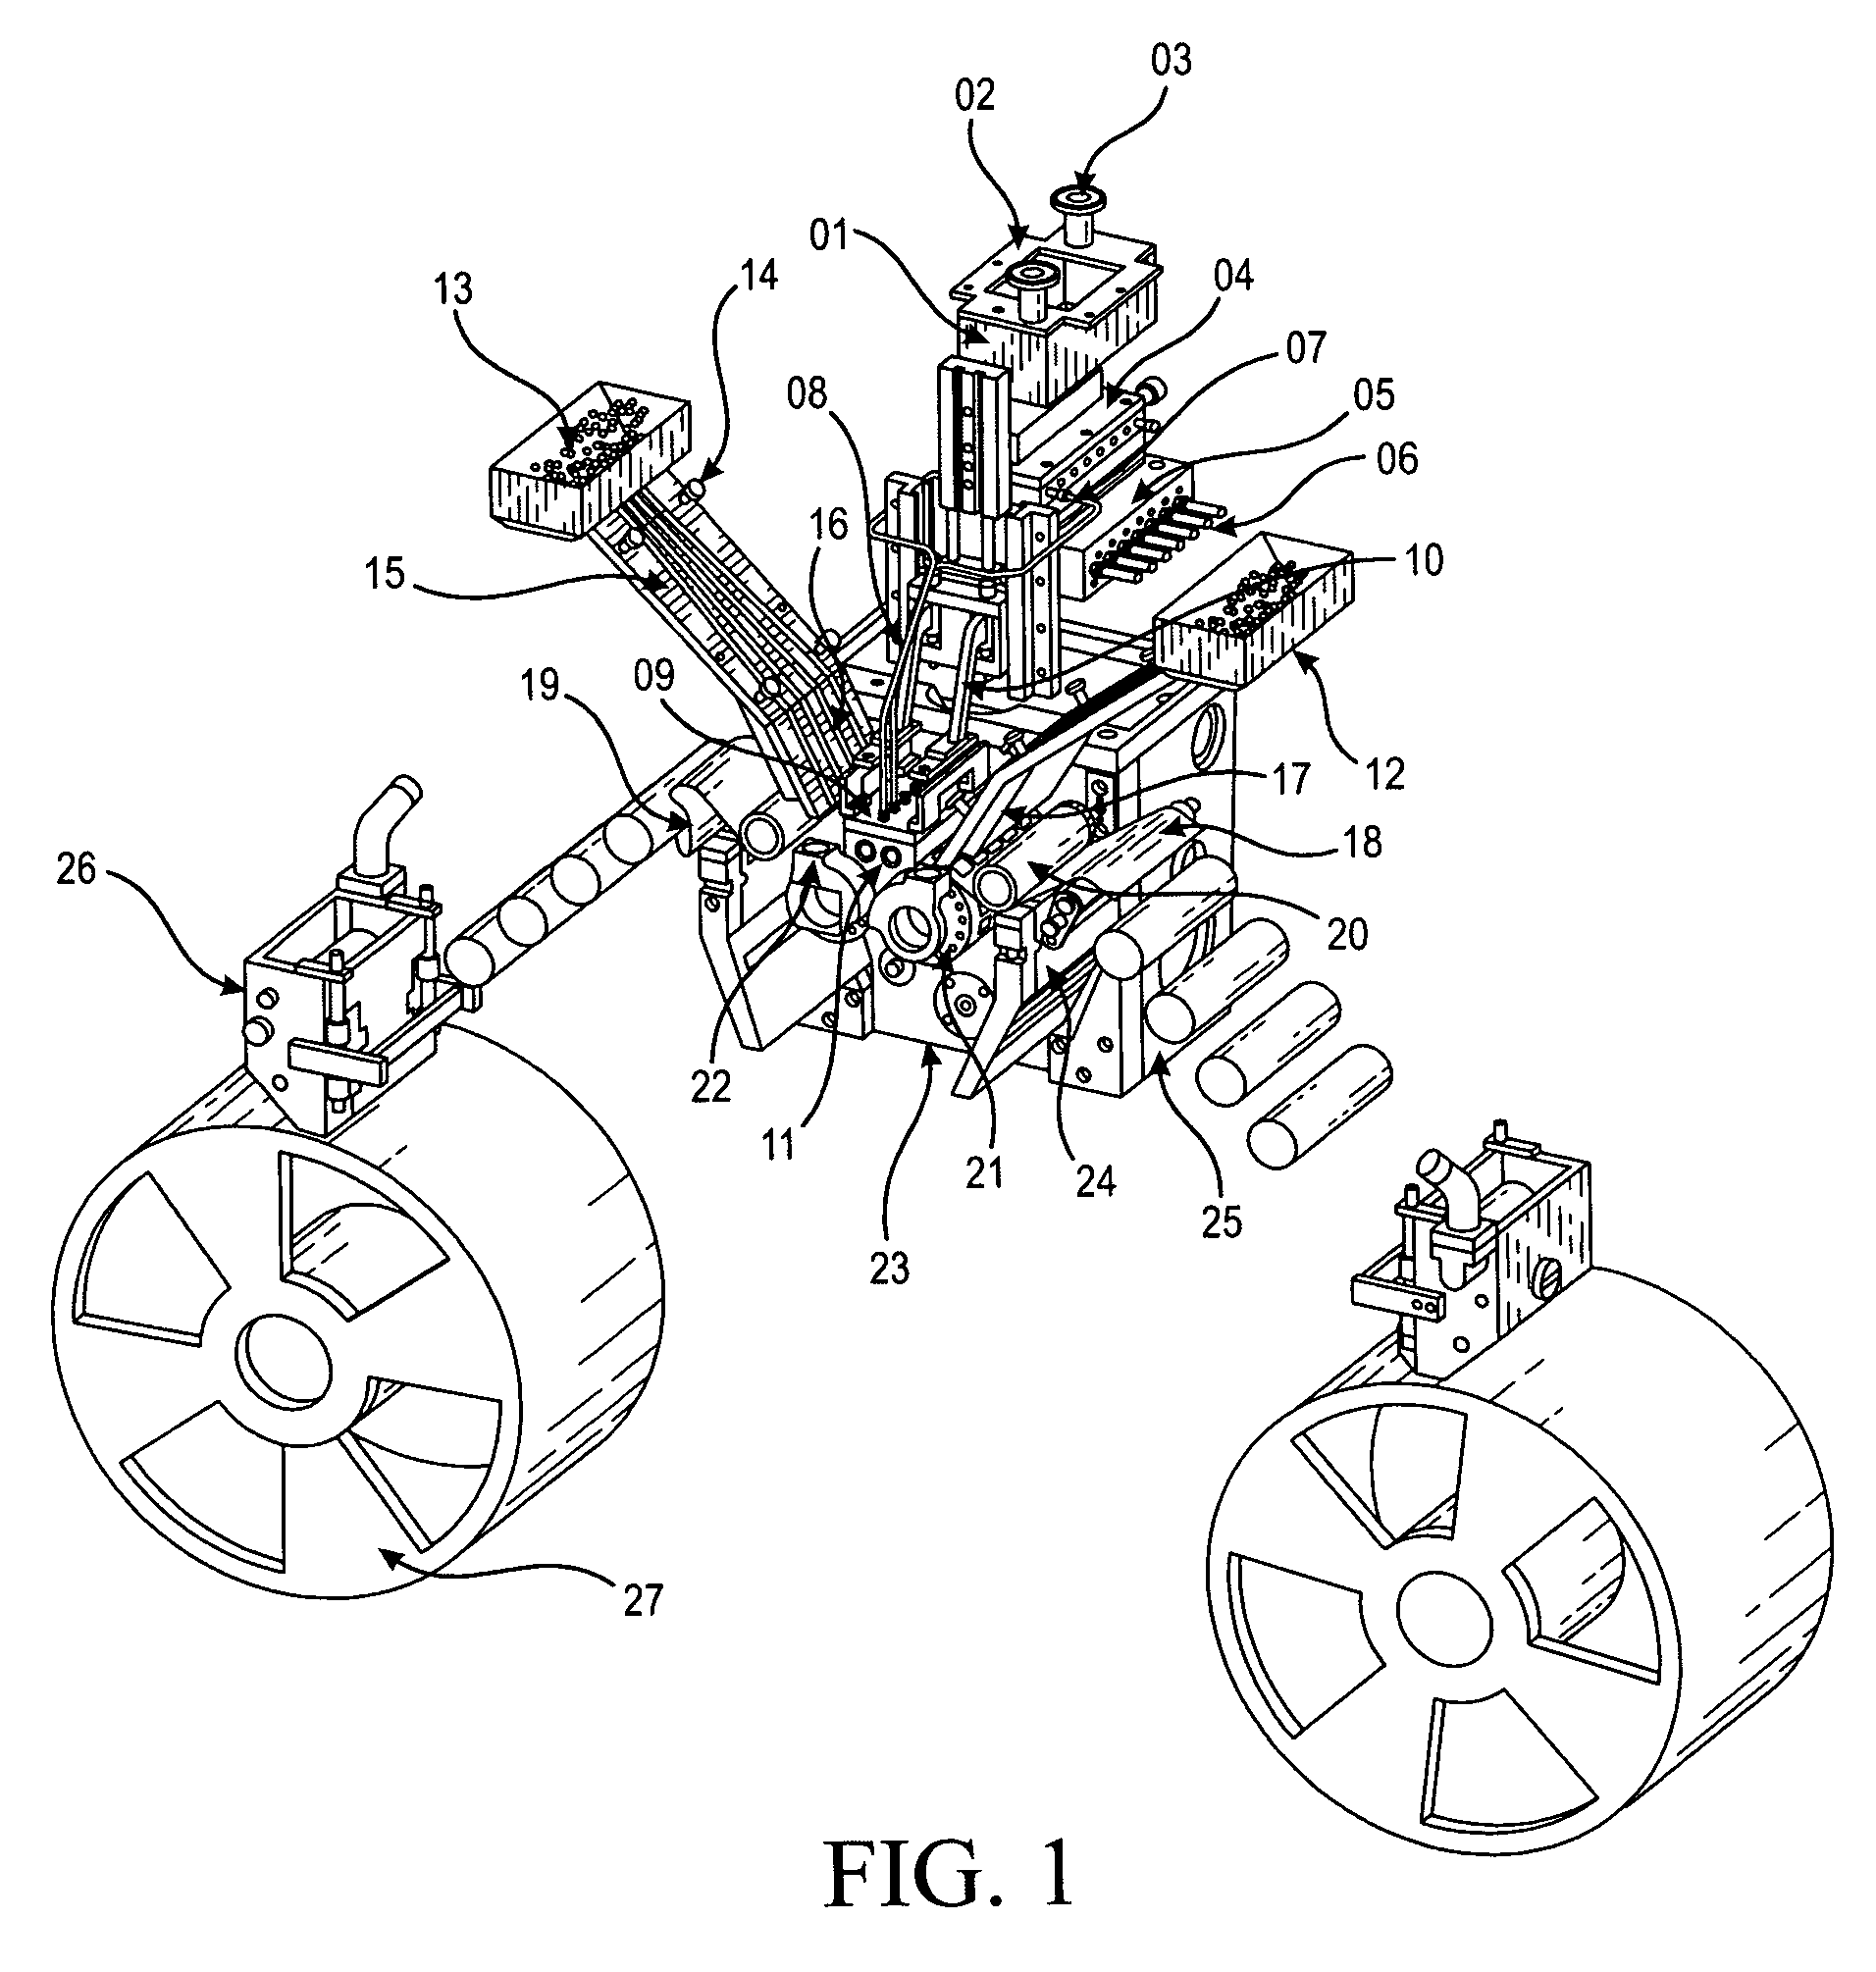 Apparatus and process for encapsulating capsules or other solid dosage forms within capsules